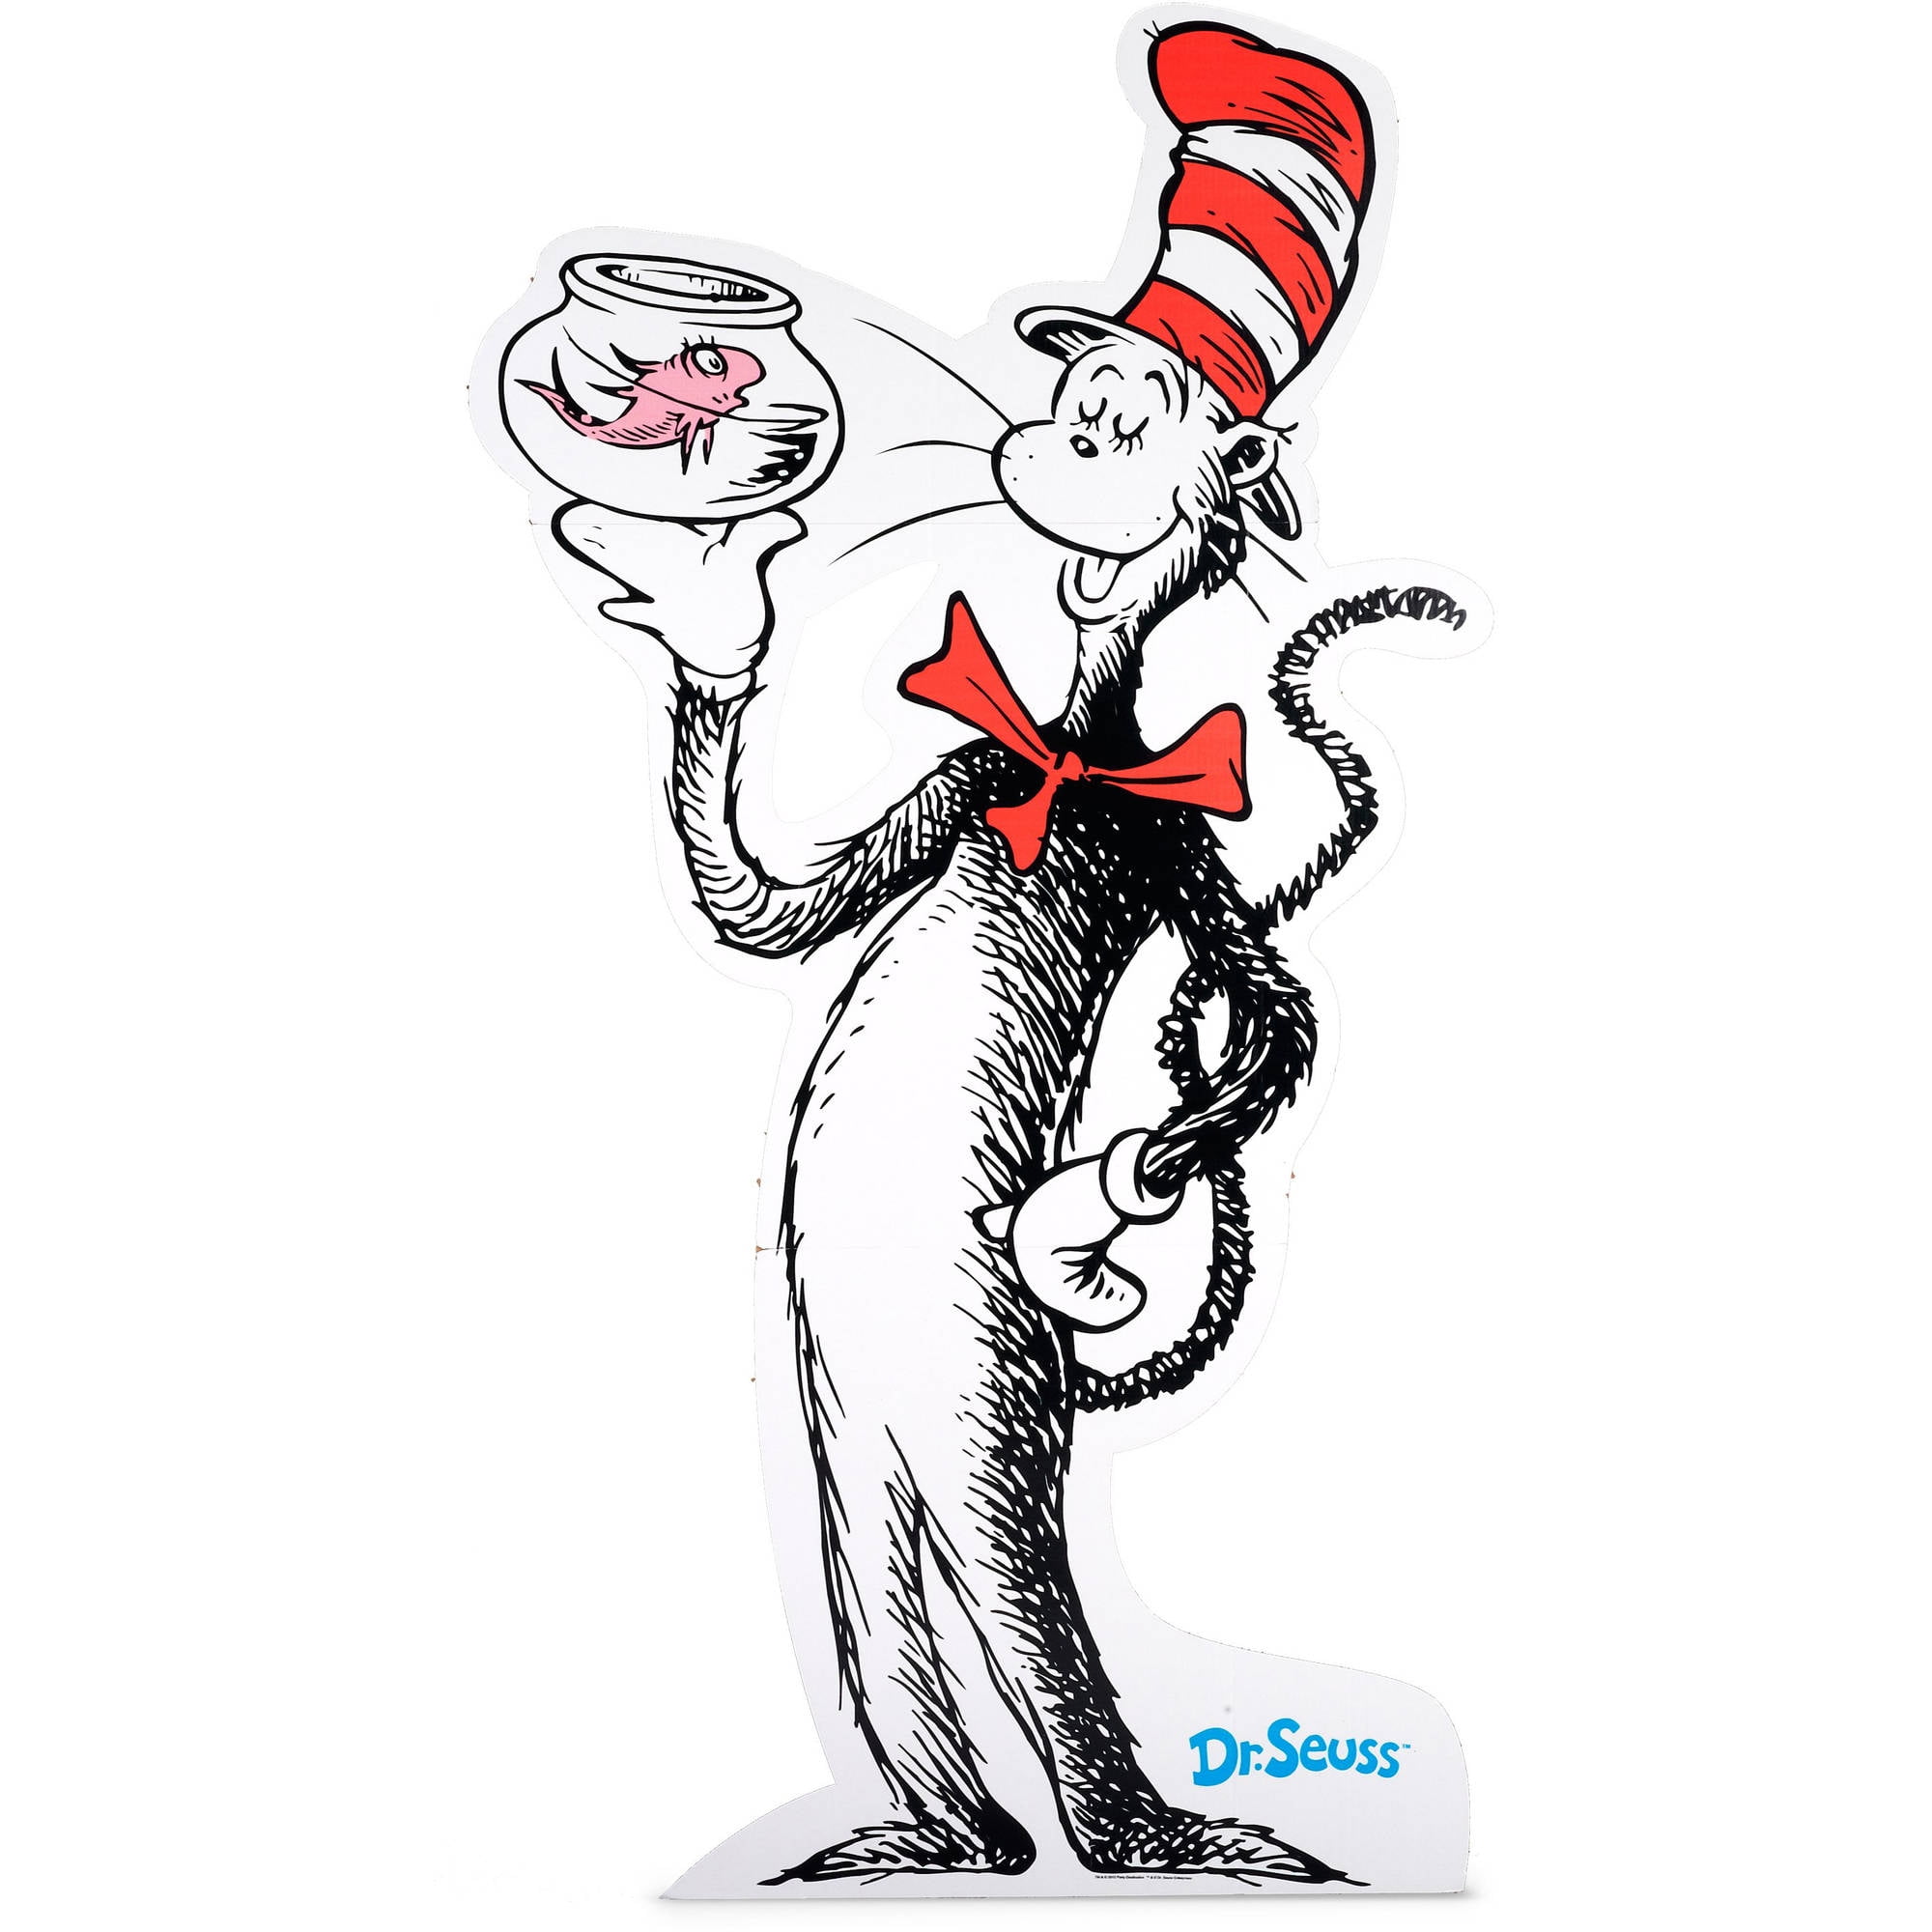 Buy Dr. Seuss Cat in the Hat Cardboard Stand-Up, 6ft at Walmart.com.